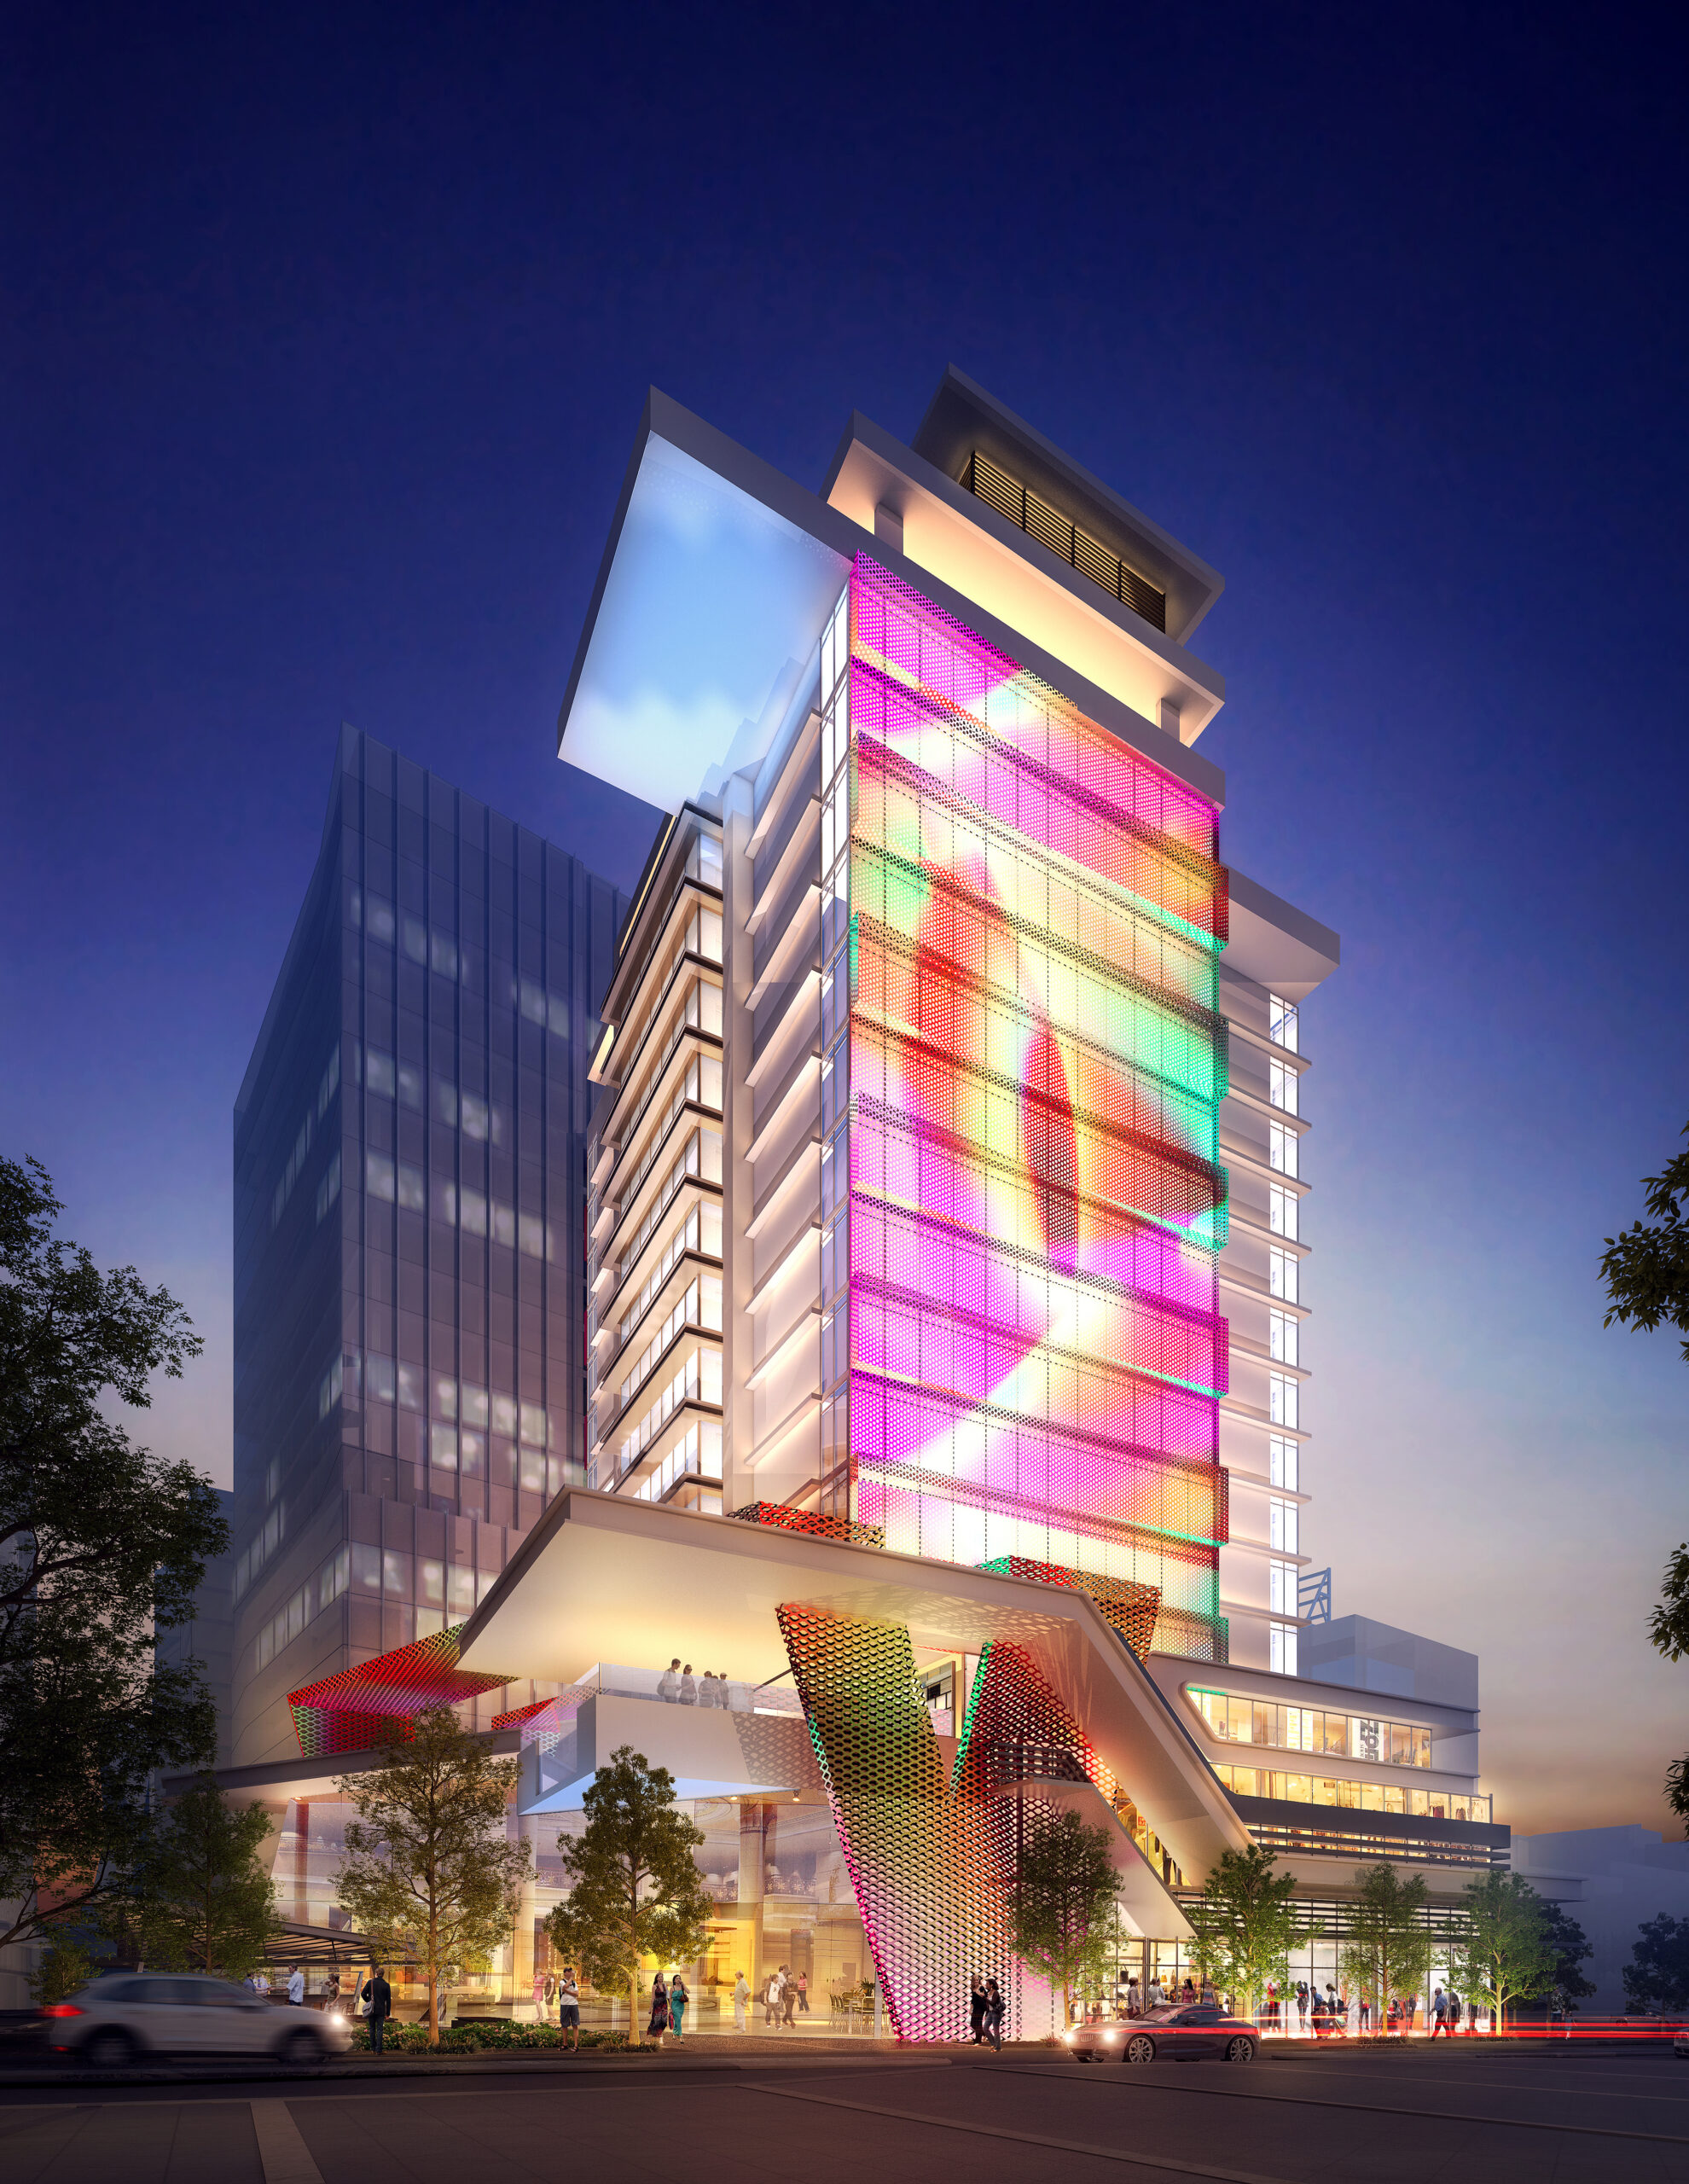 Hotel building with an illuminated facade extending the entire length, projecting vibrant colors across its face. The retail tenancies on the ground level of the podium are also illuminated, bustling with people. The image captures a lively scene at dusk